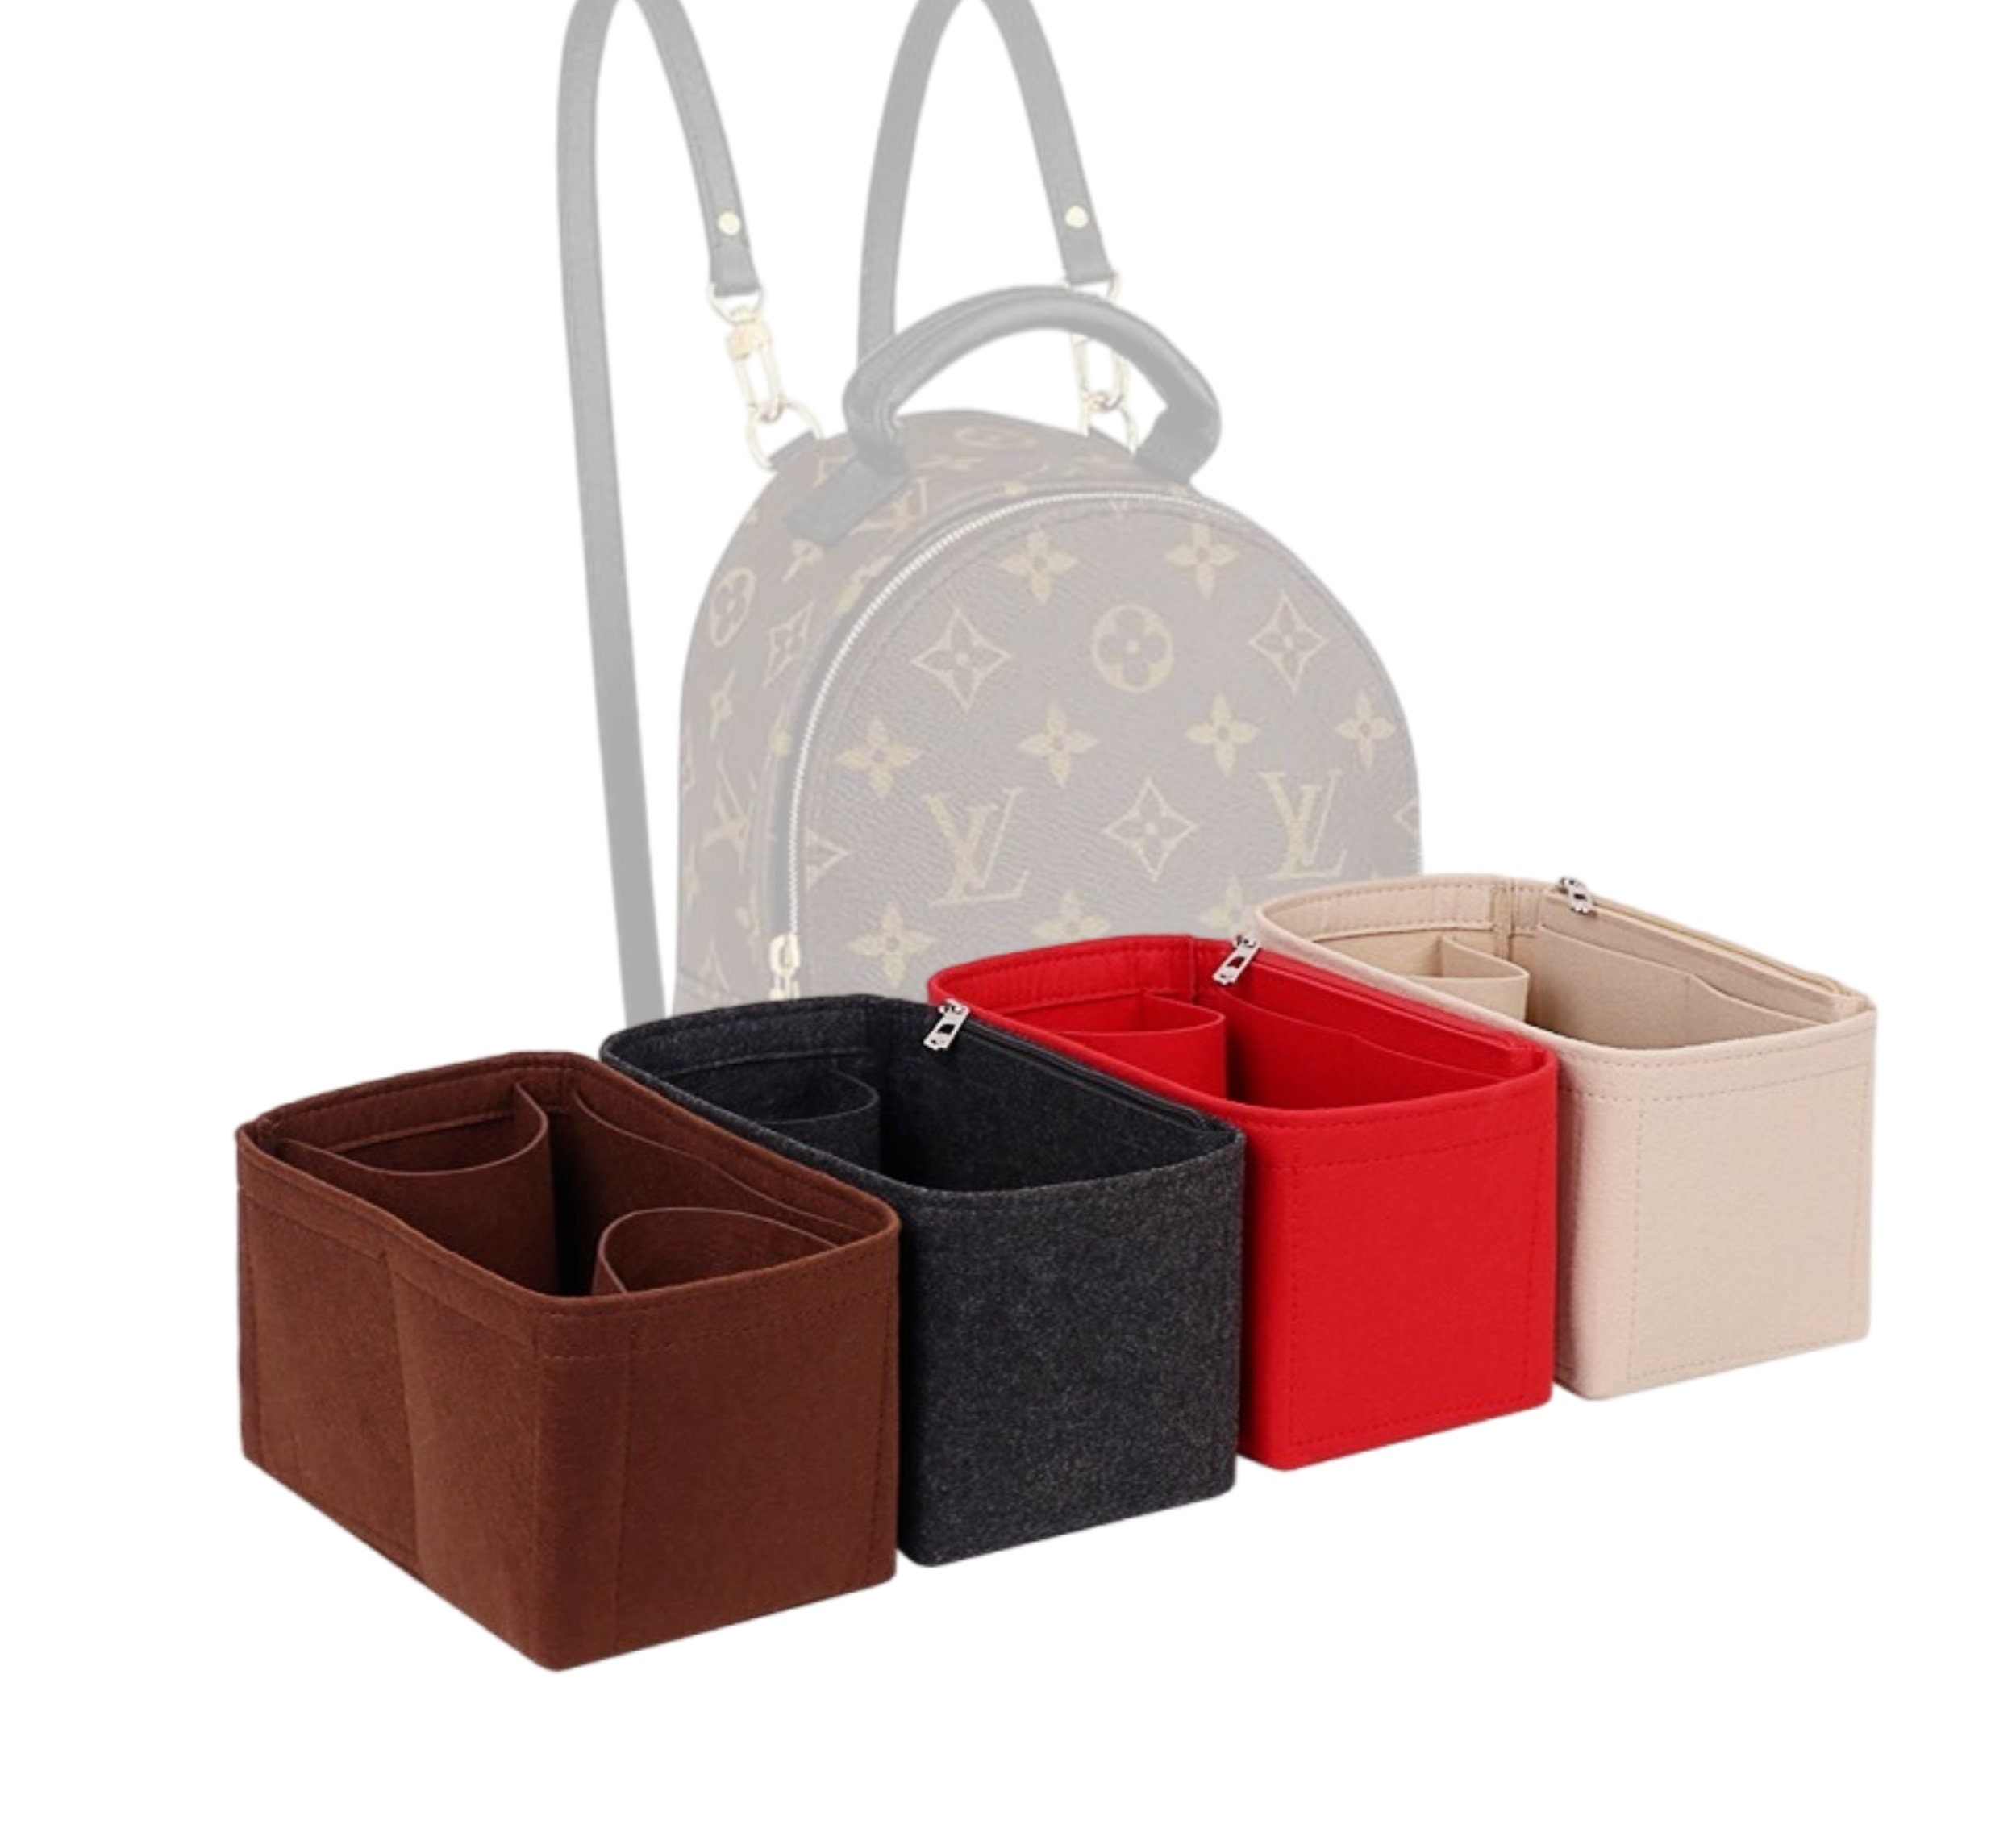 For Palm Springs Backpack Mini Bag Insert Organizer In 15 Cm/5.9 Inches  Height, Bag Liner